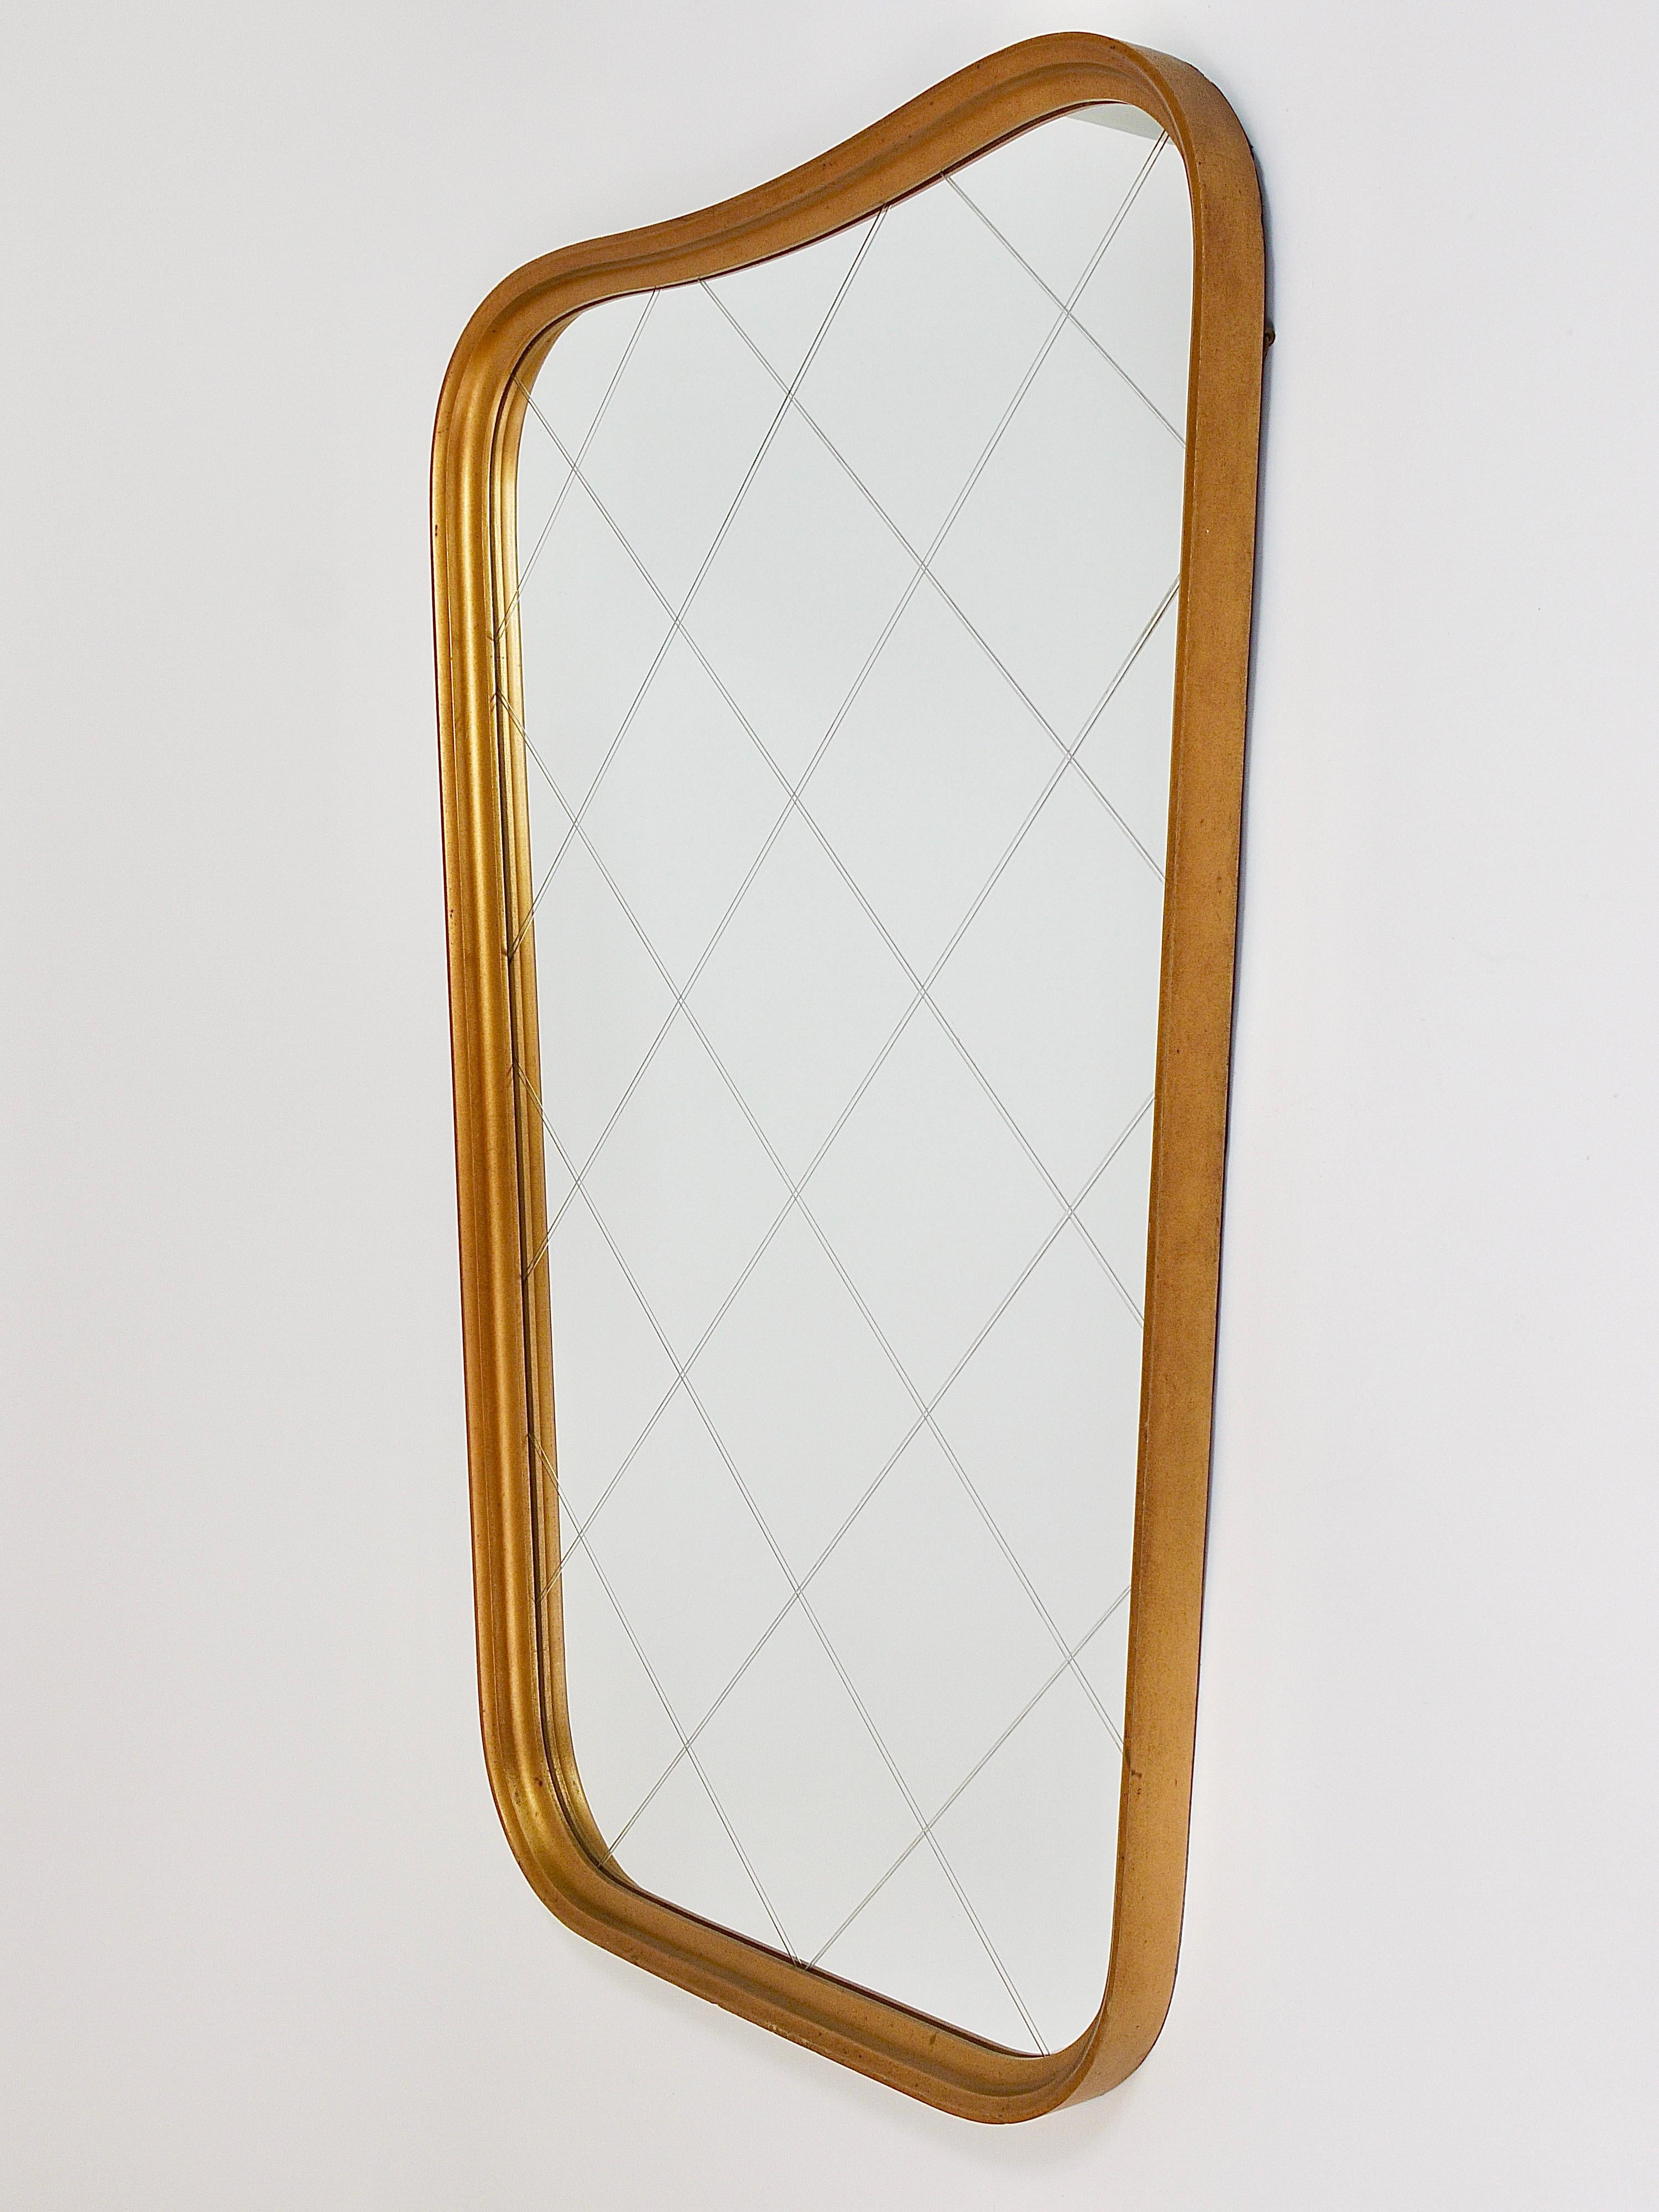 20th Century Large Mid-Century Golden Wall Mirror with Faceted Check Pattern, Austria, 1950s For Sale